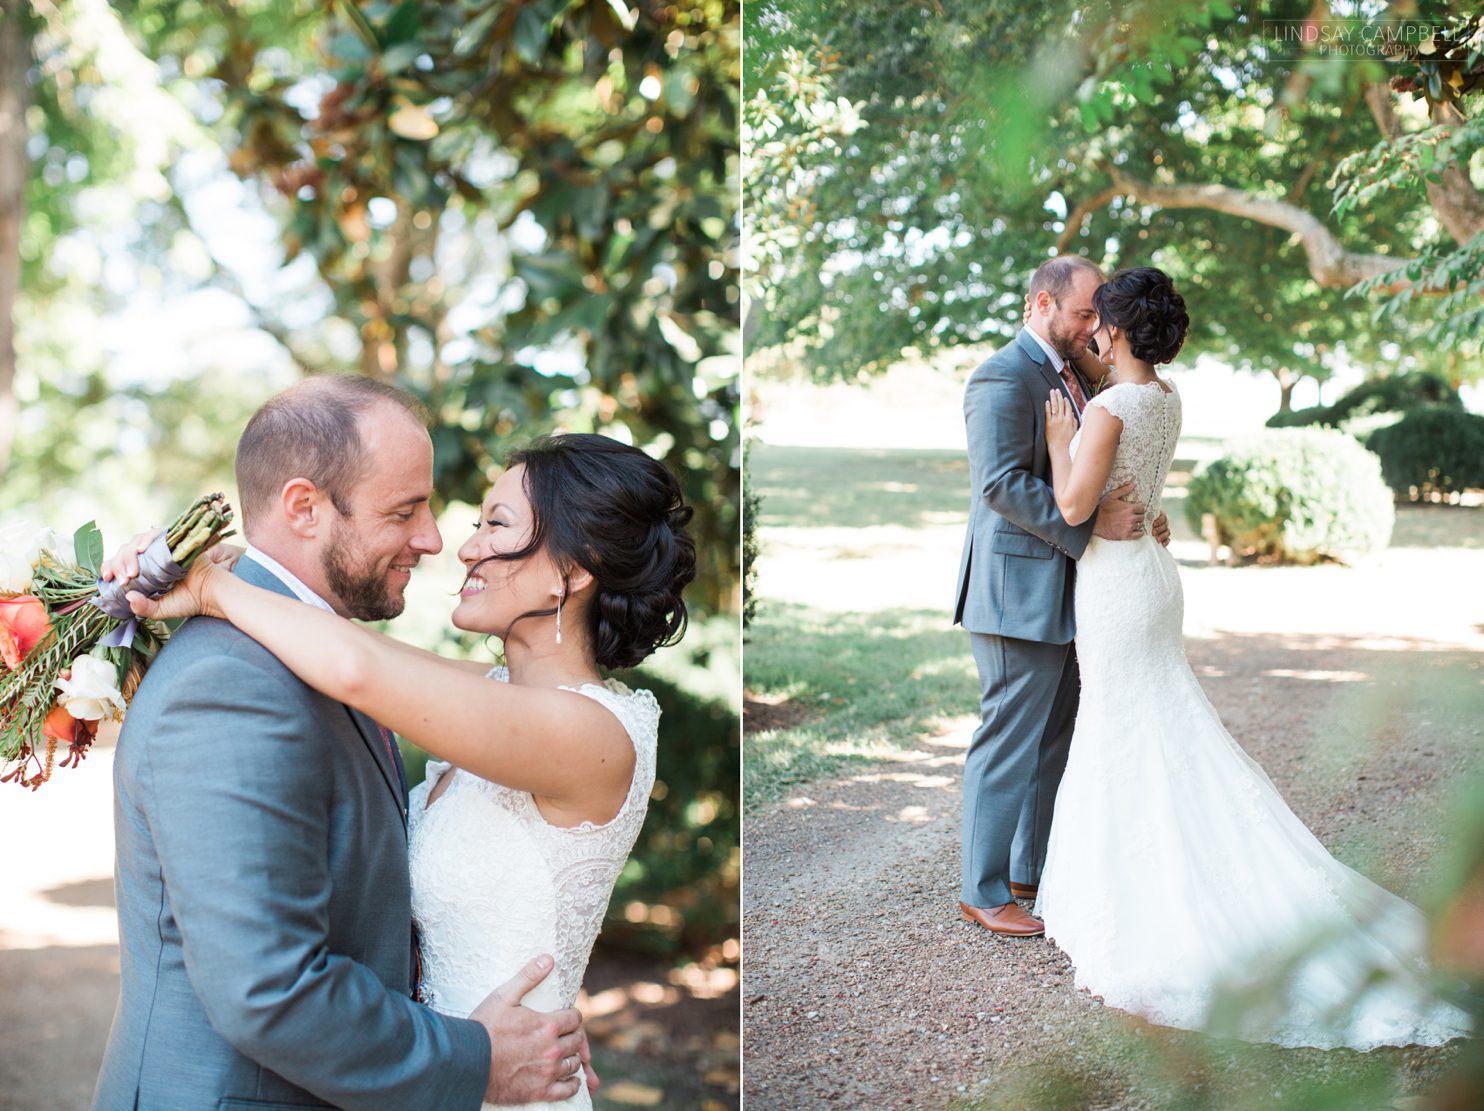 Taylor-and-Ryan-Homestead-Manor-Wedding-Photos-Spring-Hill-Wedding-Photographer_0026-2 Taylor and Ryan's Intimate Southern Estate Elopement at Homestead Manor